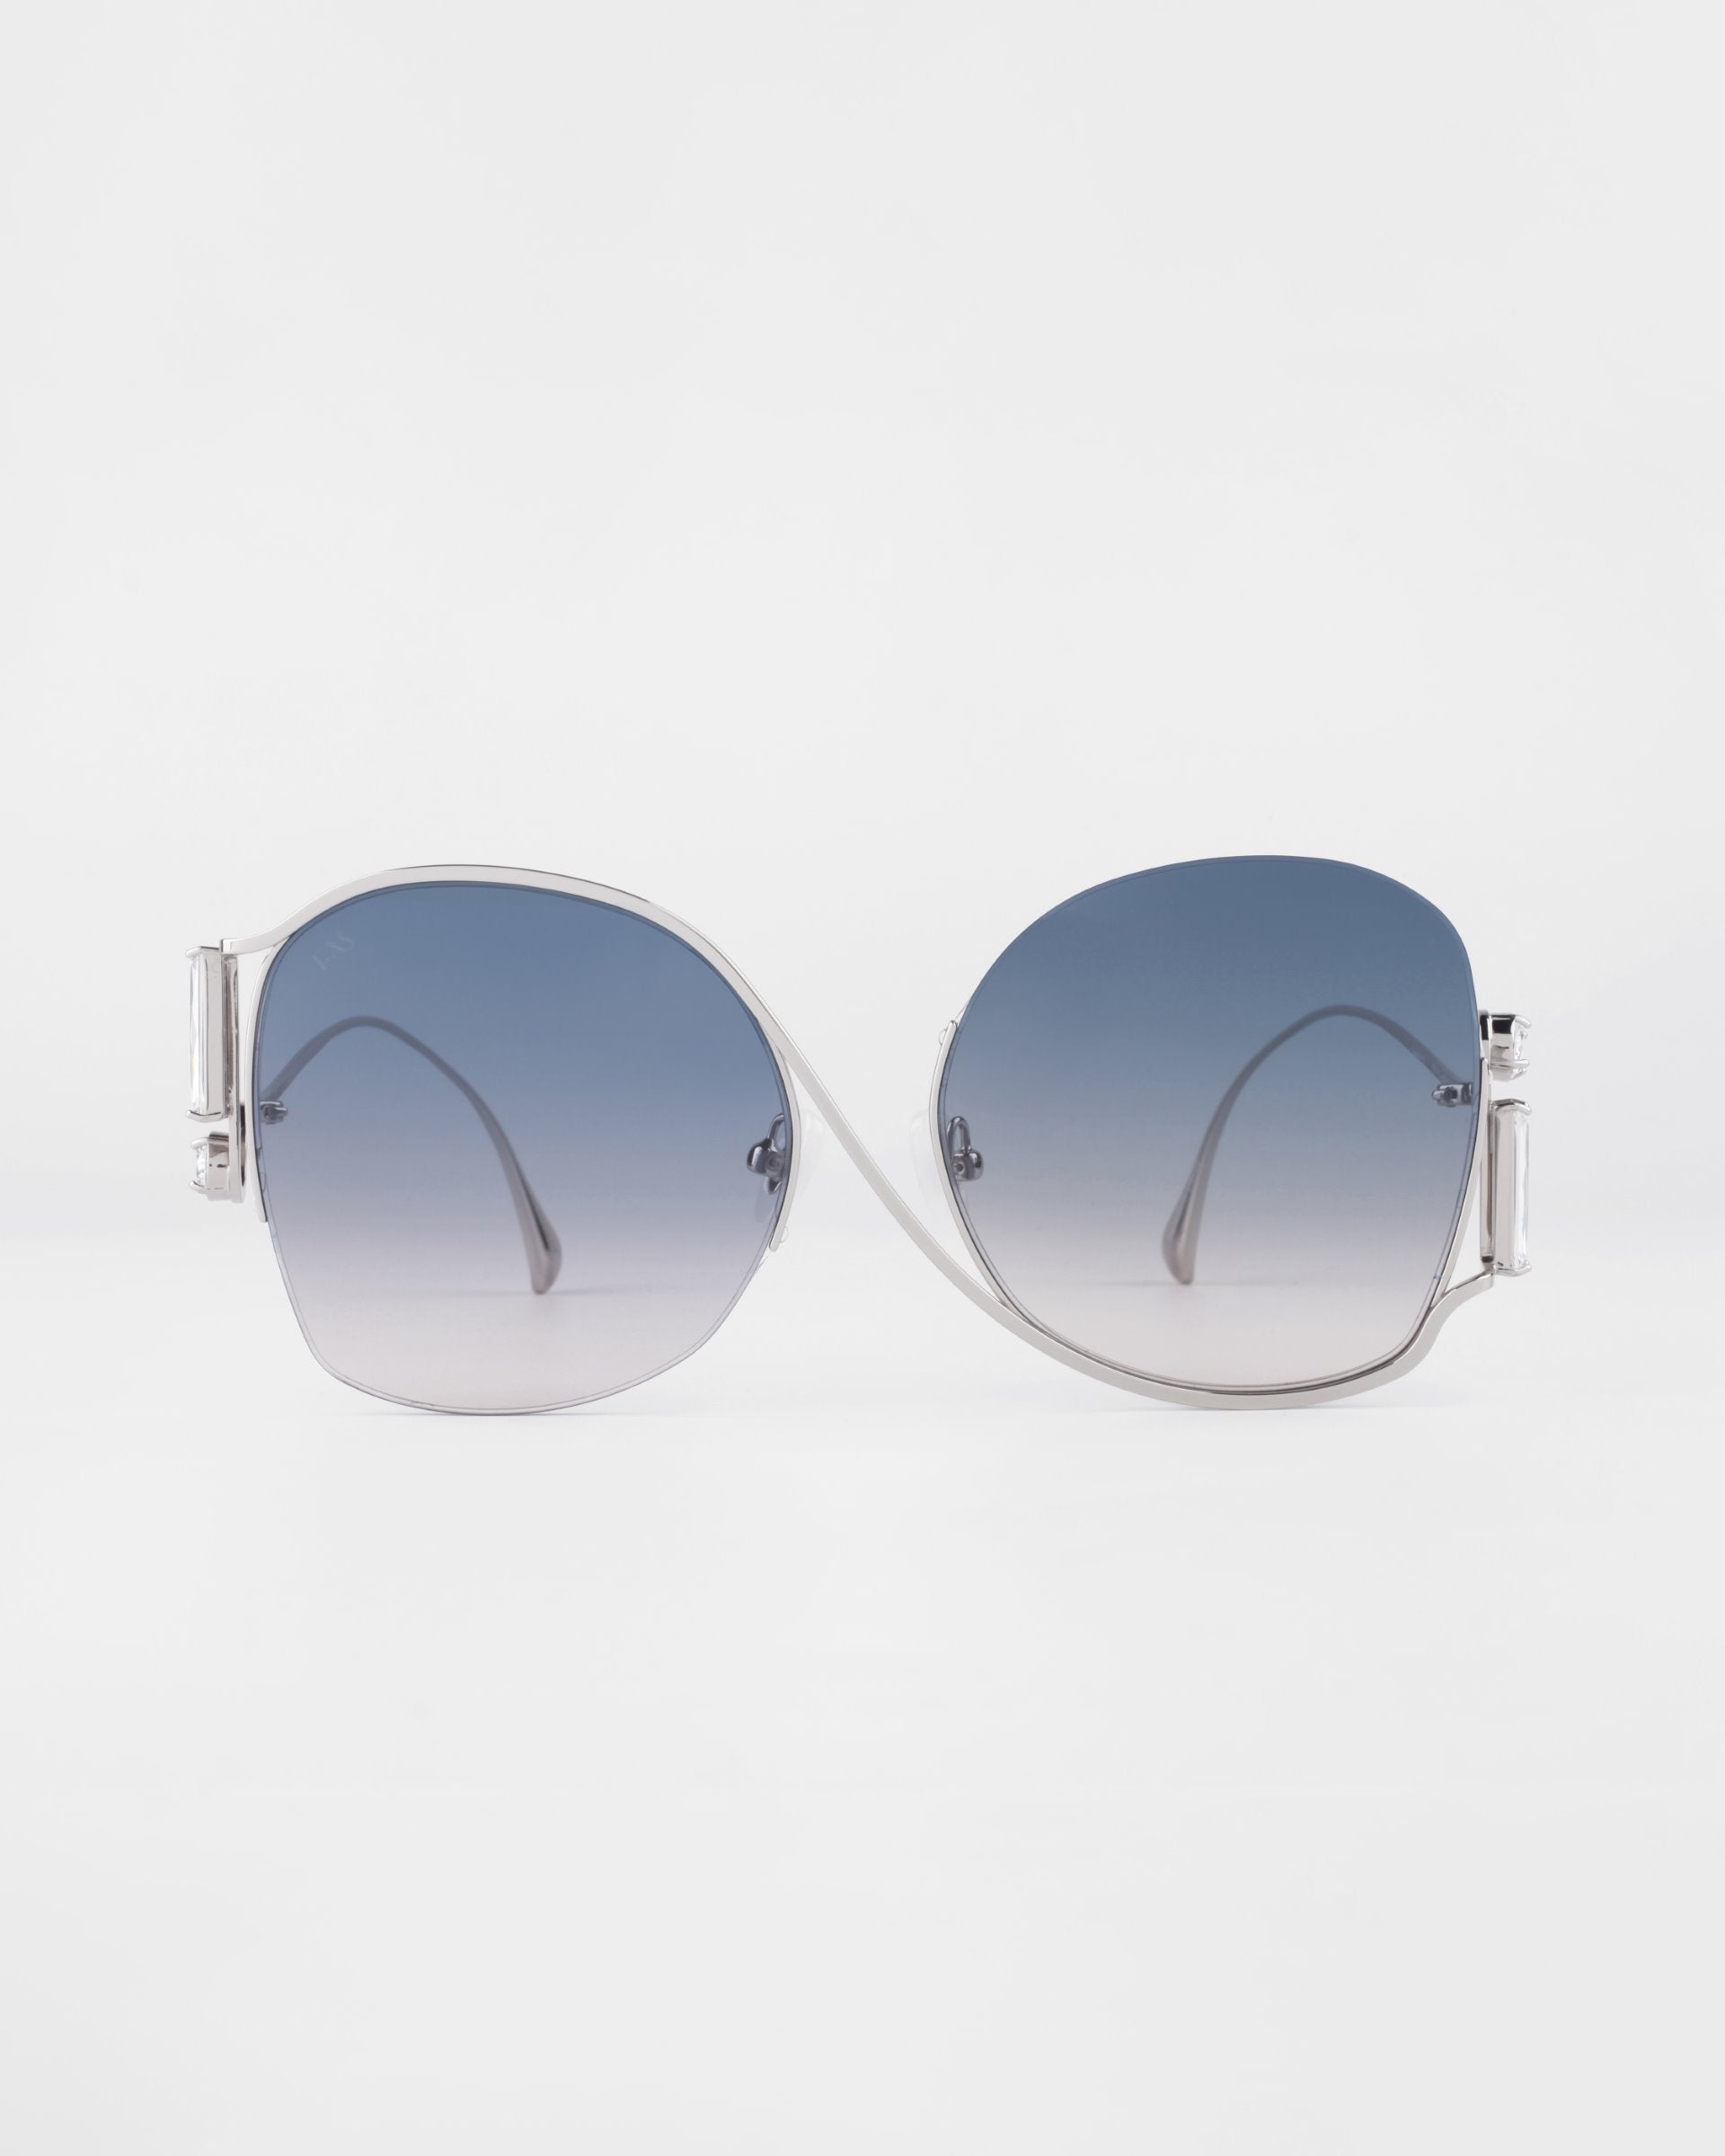 A pair of luxurious For Art&#39;s Sake® Sapphire sunglasses with silver frames and large, gradient lenses. The lenses transition from dark blue at the top to lighter shades towards the bottom. Crystal embellishments add a touch of elegance. The background is white, making the sunglasses the focal point.